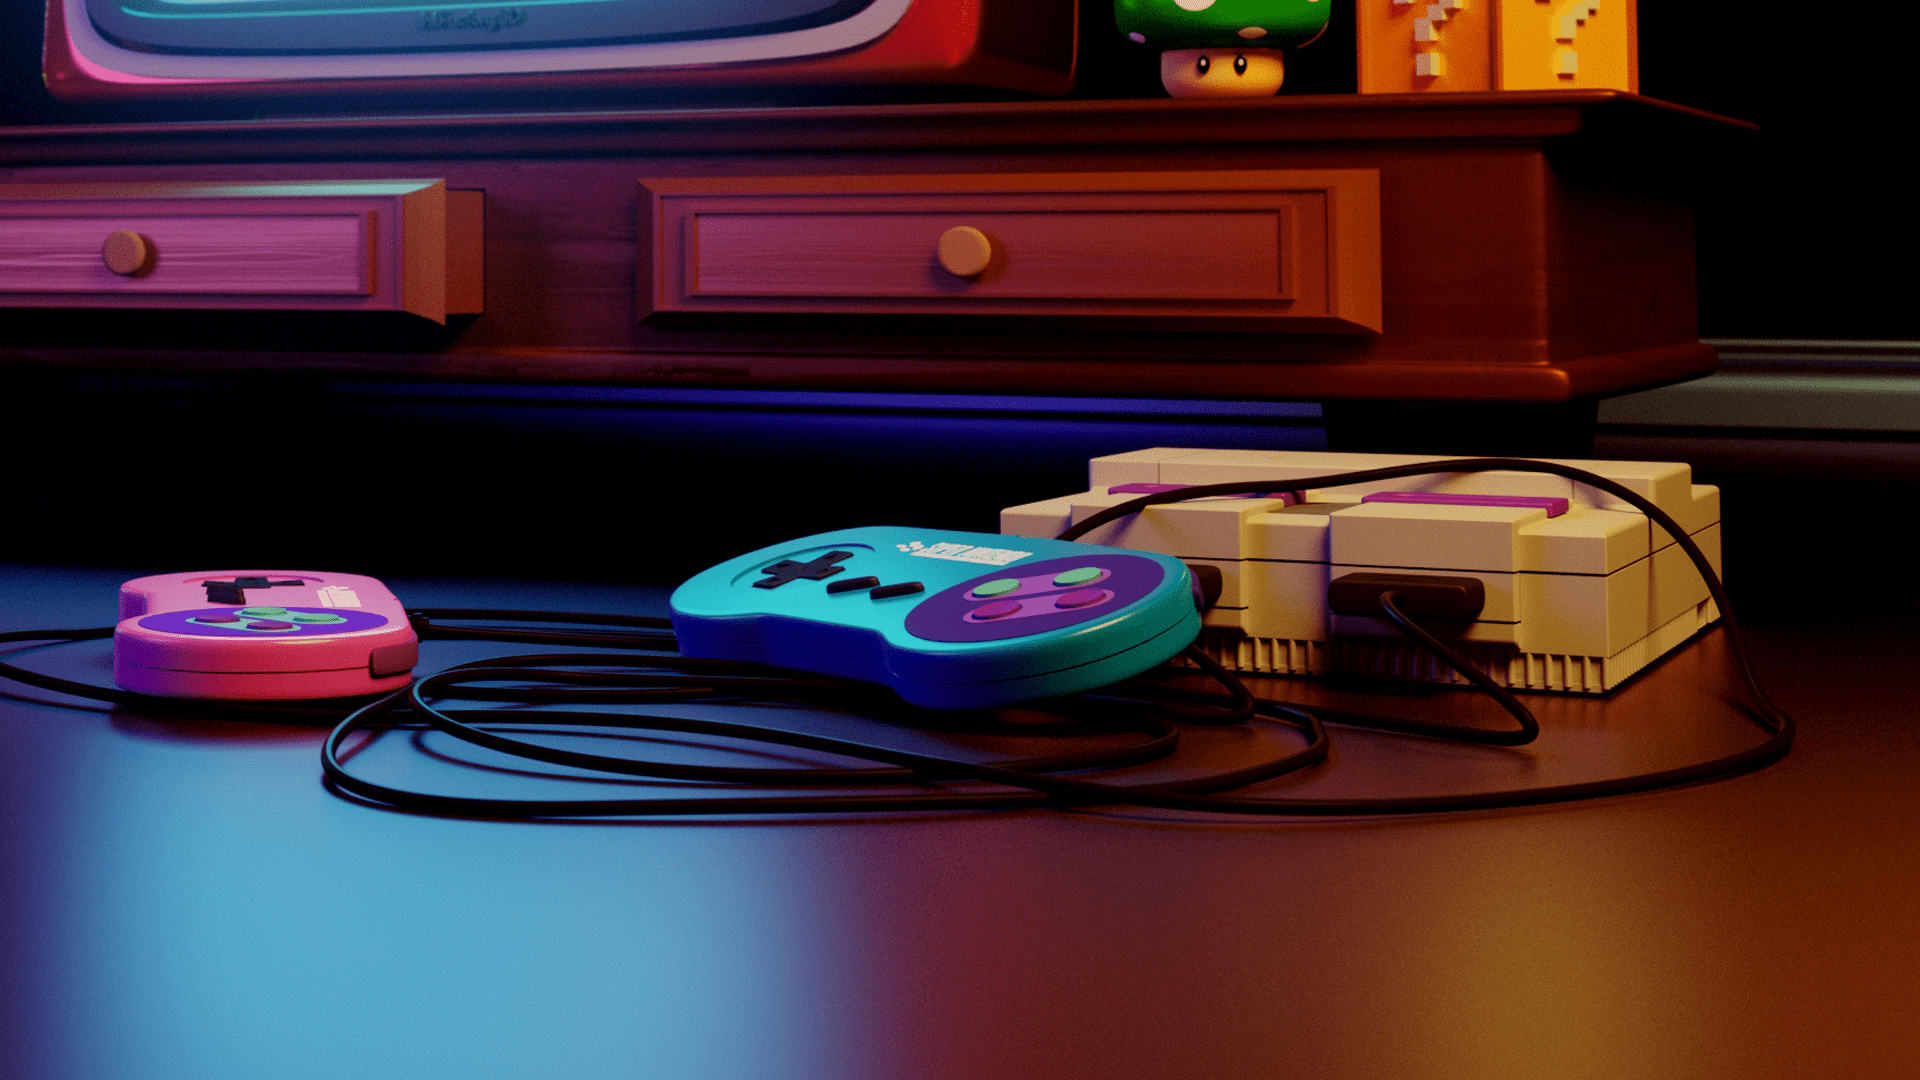 A Super Nintendo Entertainment System sits on the floor next to a TV. - Nintendo